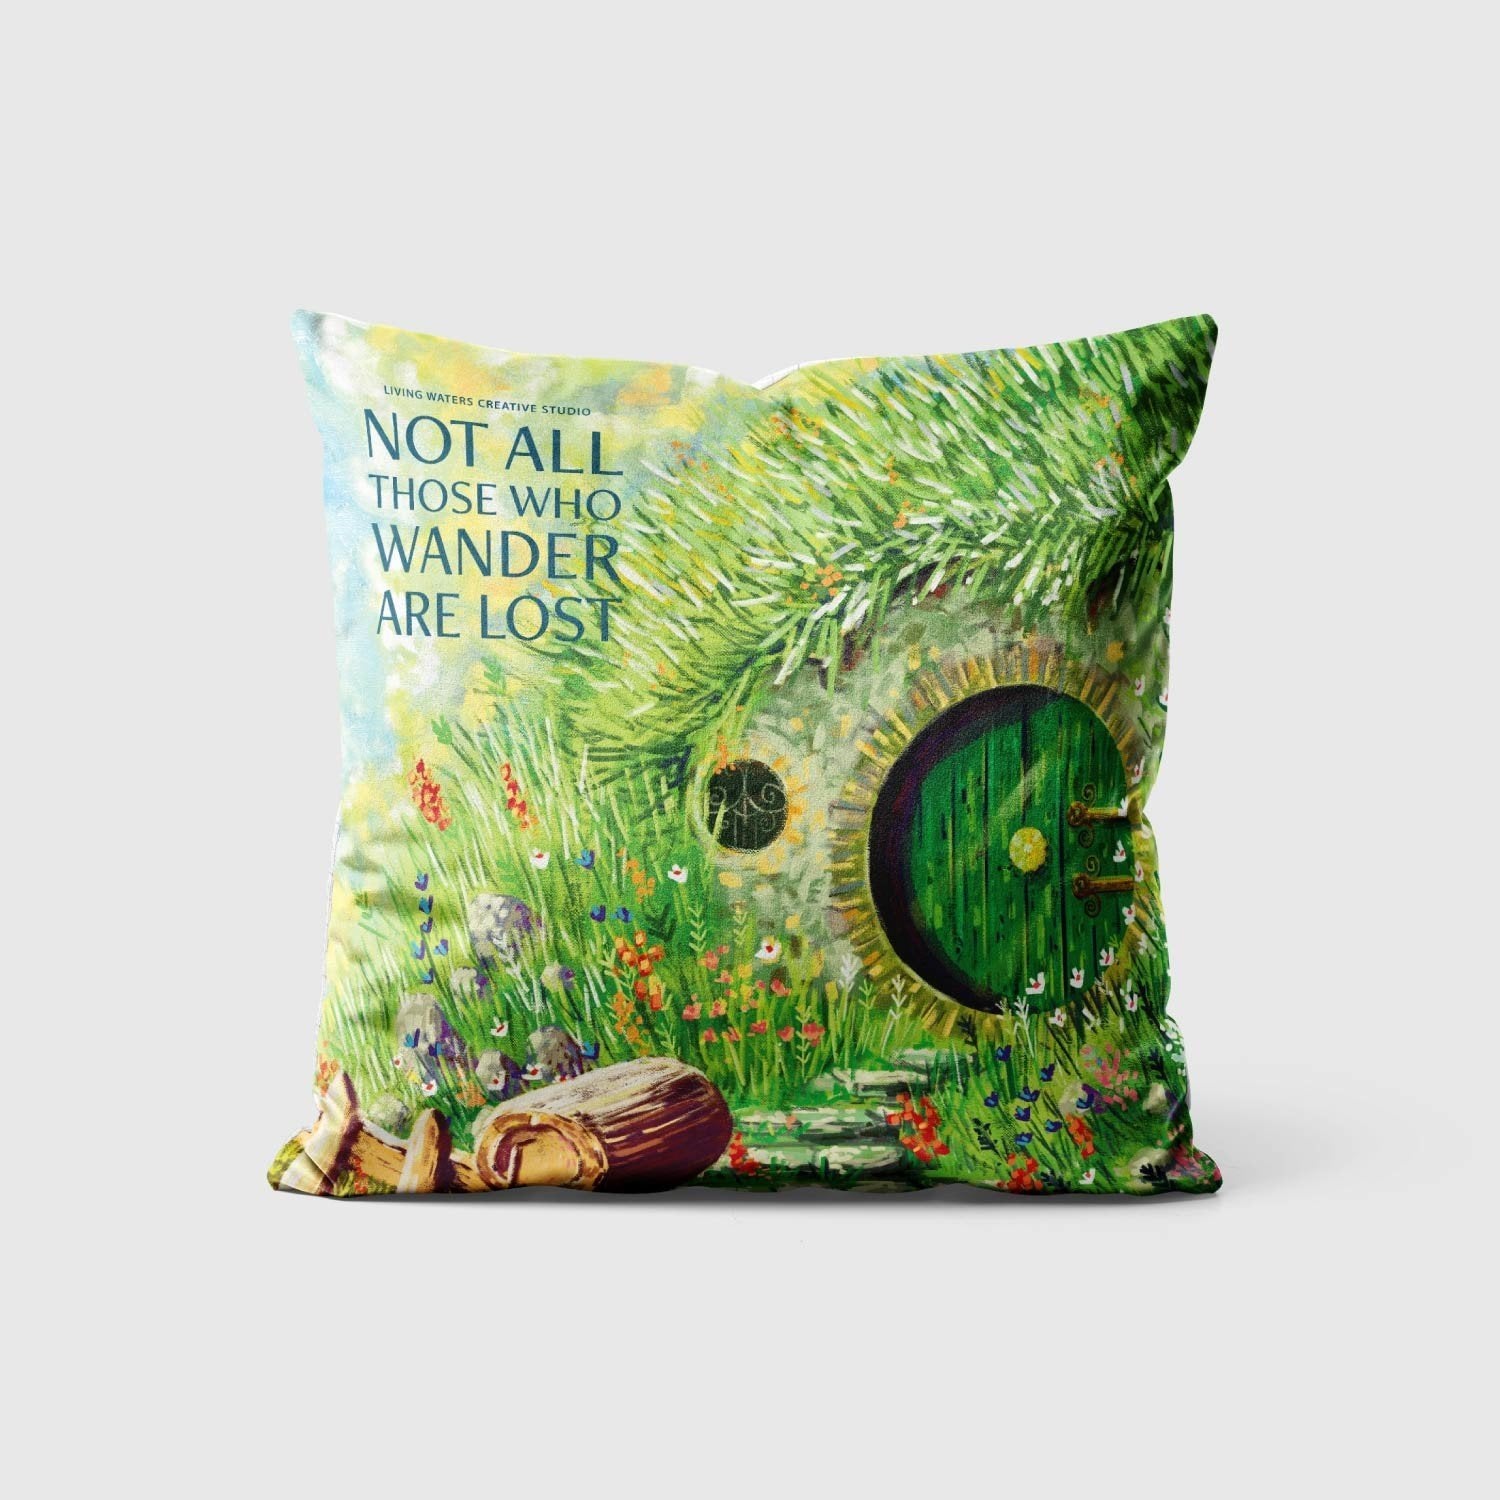 The Wander Cushion Cover